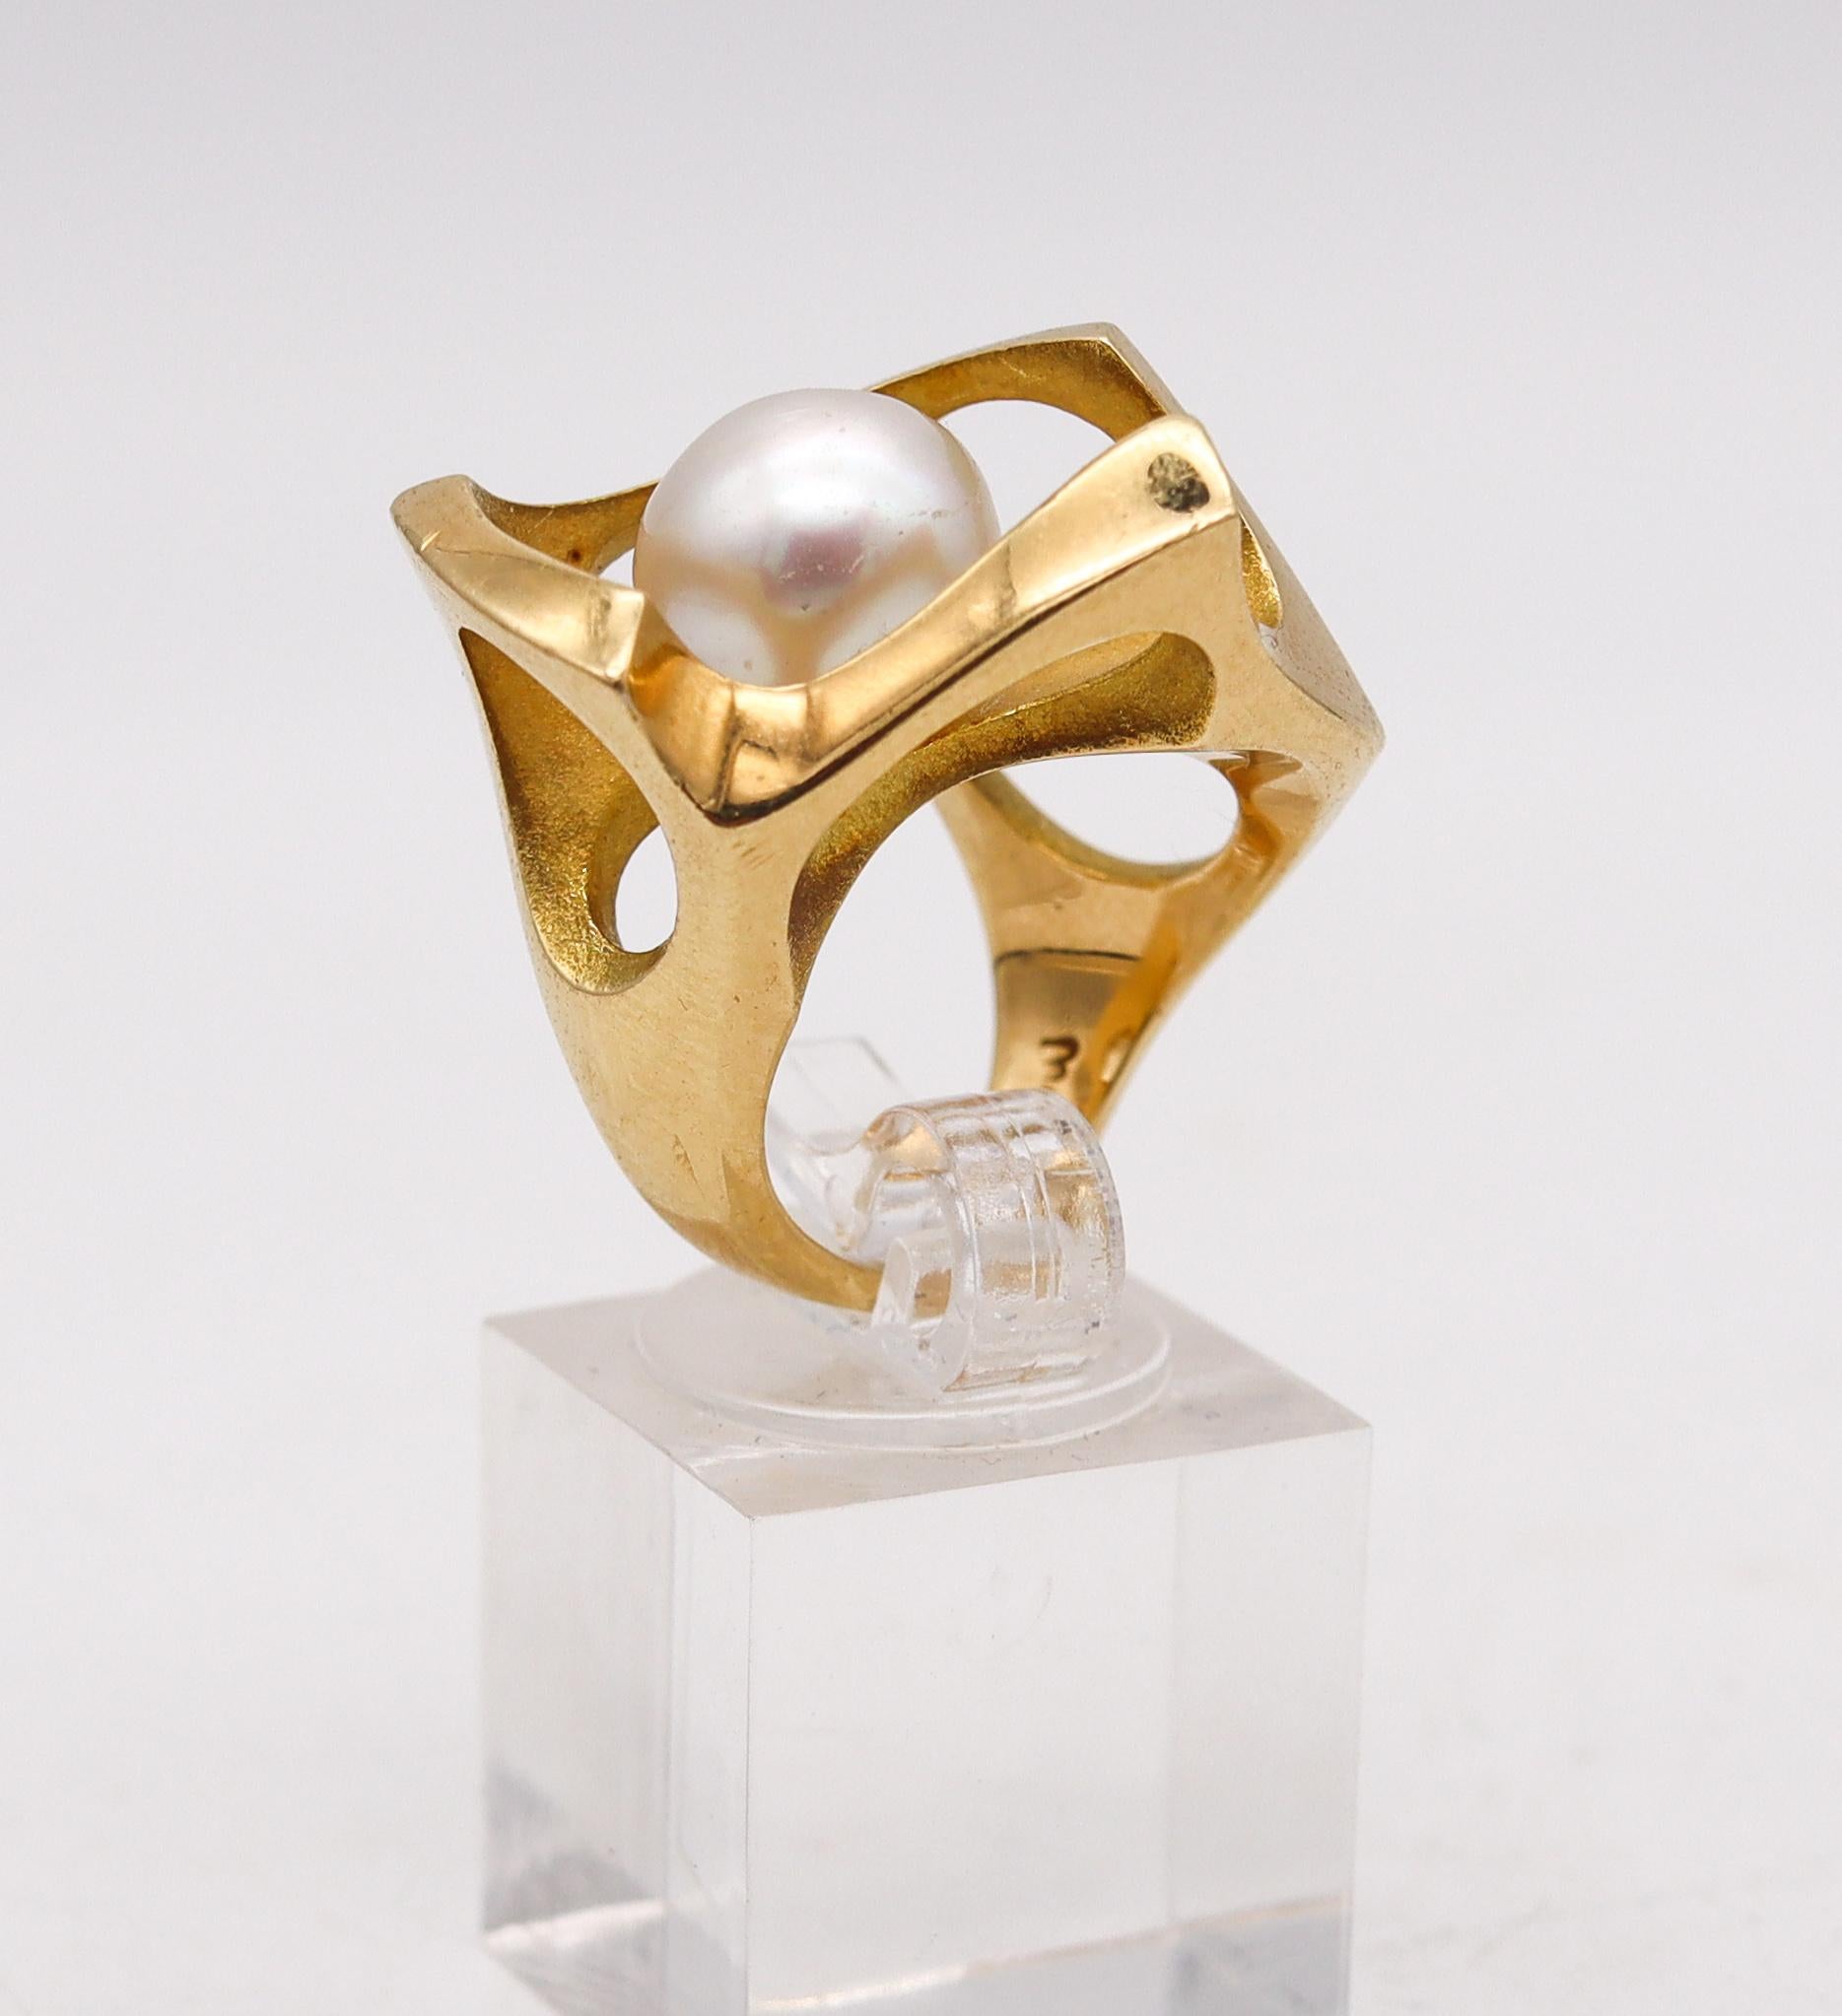 Designer Sculptural Biomorphic Abstract Cocktail Ring 18Kt Gold with Akoya Pearl 2